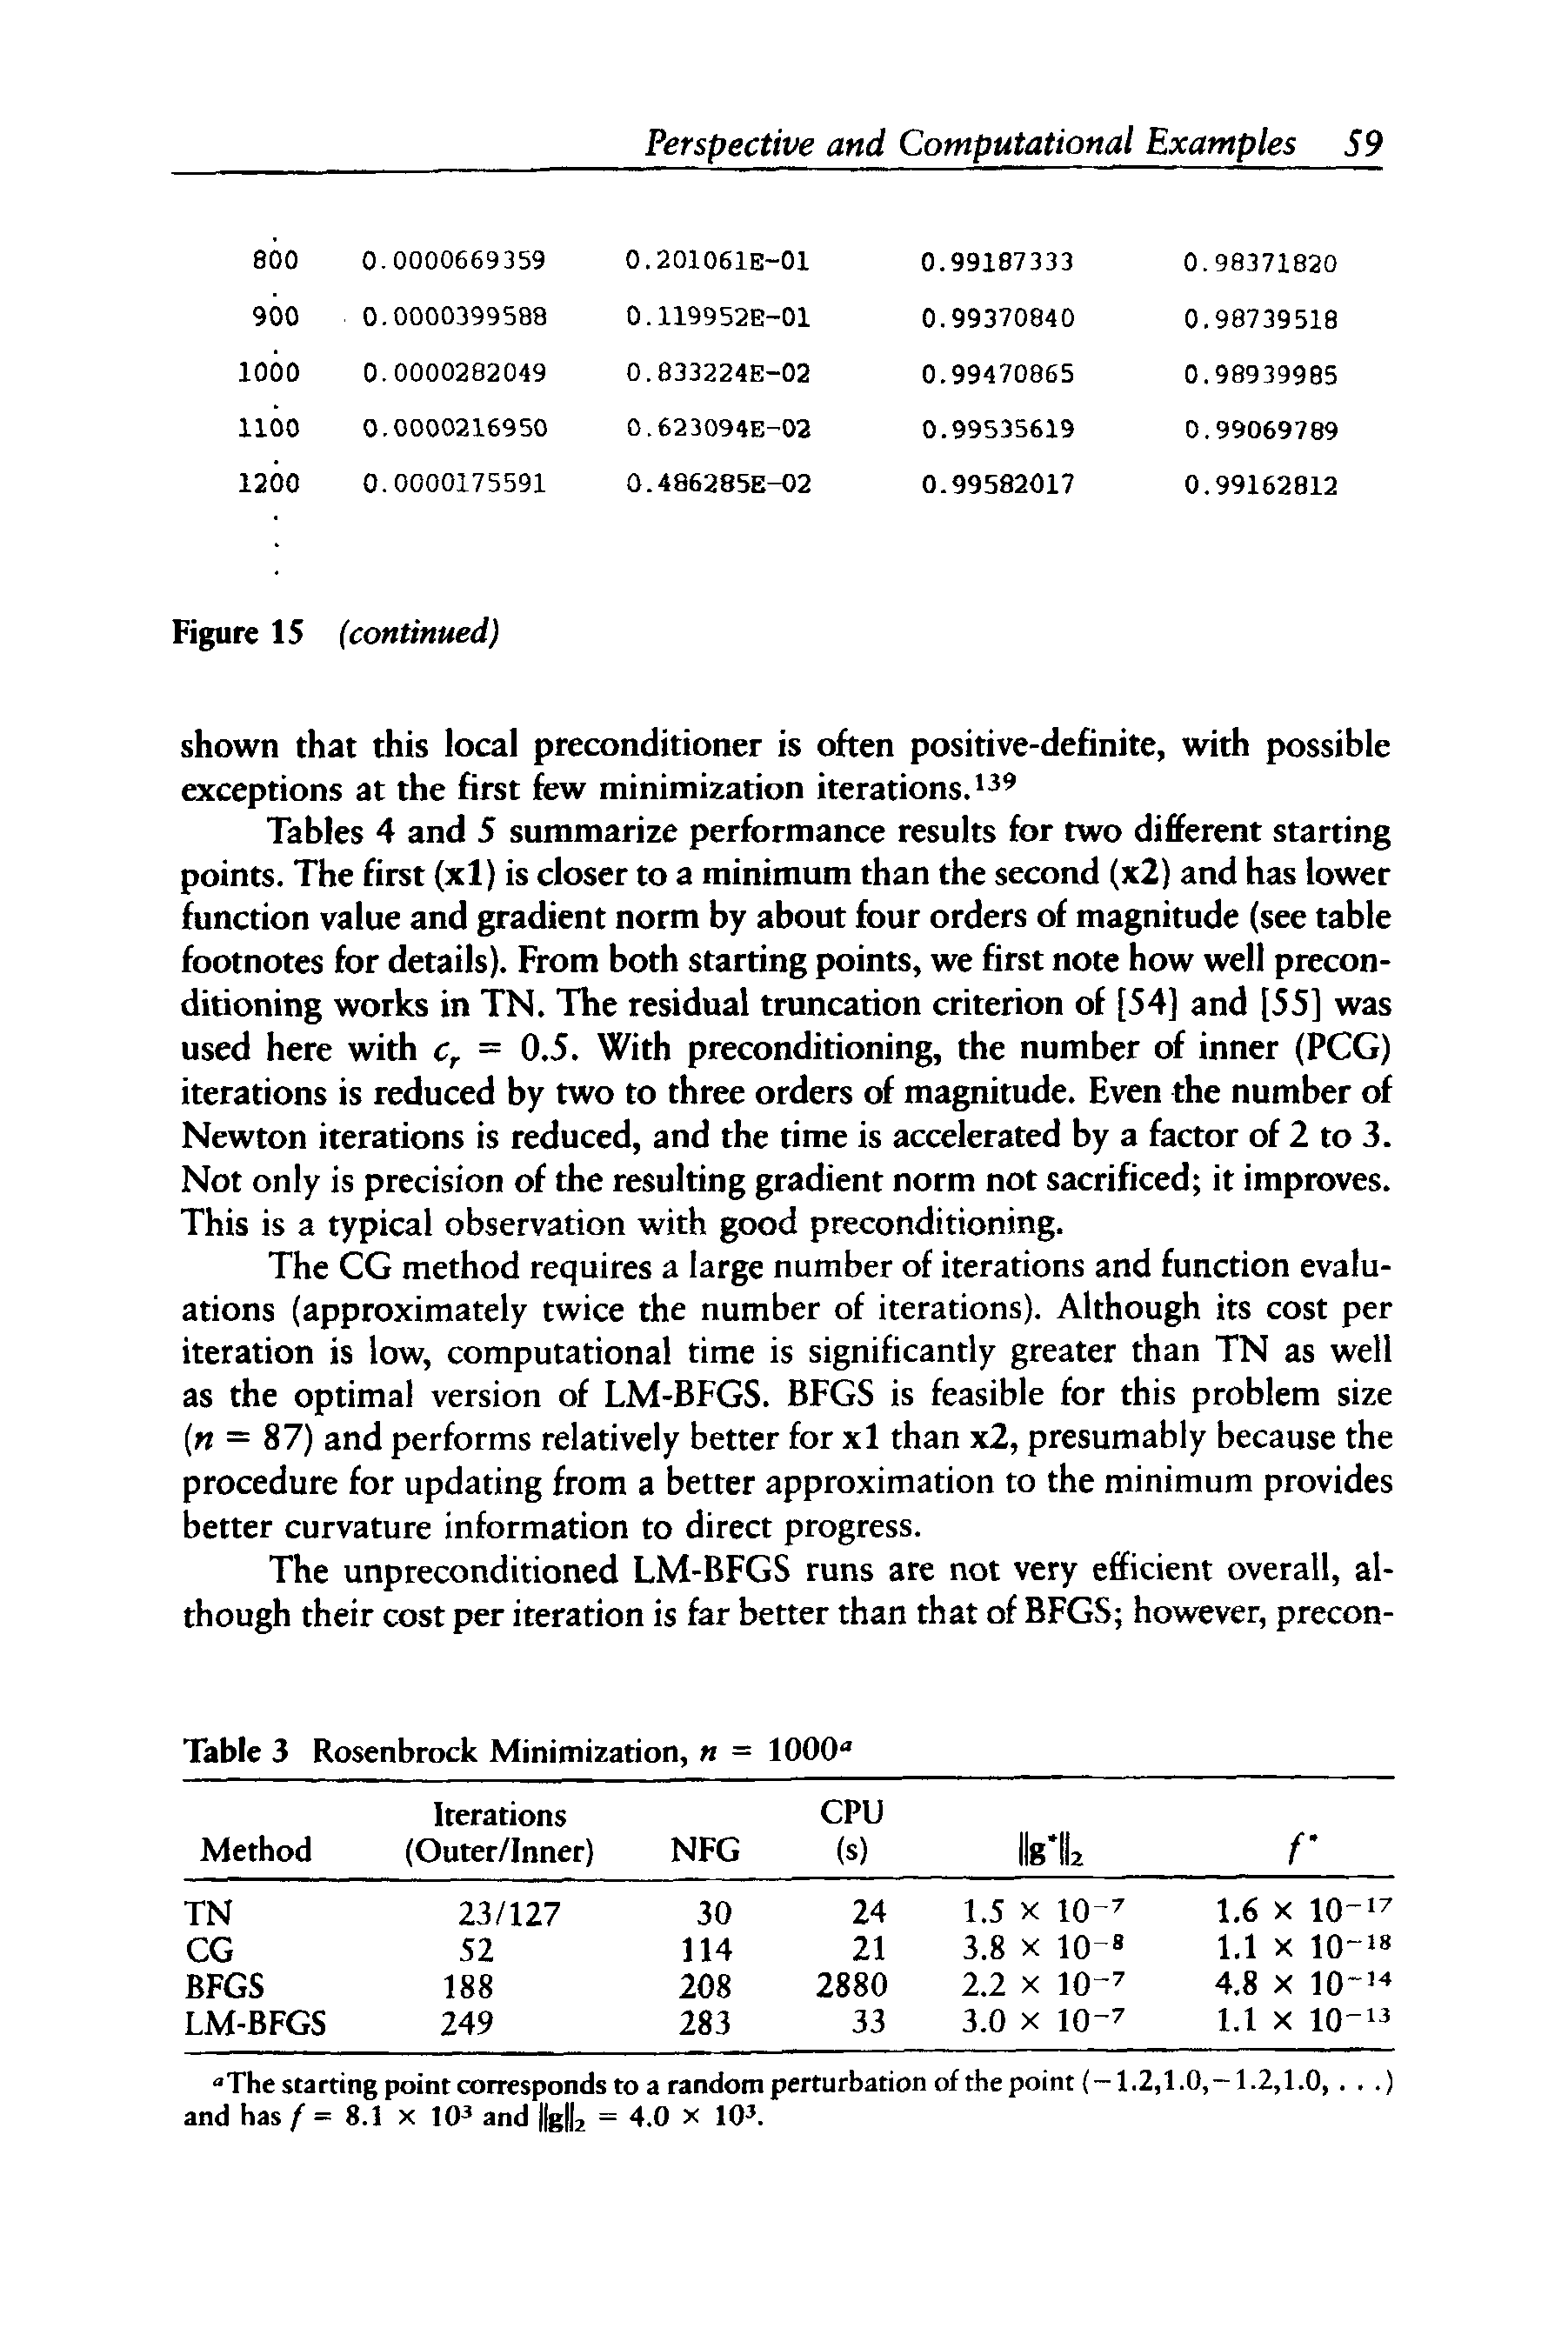 Tables 4 and 5 summarize performance results for two different starting points. The first (xl) is closer to a minimum than the second (x2) and has lower function value and gradient norm by about four orders of magnitude (see table footnotes for details). From both starting points, we first note how well preconditioning works in TN. The residual truncation criterion of [54] and [55] was used here with cr = 0.5. With preconditioning, the number of inner (PCG) iterations is reduced by two to three orders of magnitude. Even the number of Newton iterations is reduced, and the time is accelerated by a factor of 2 to 3. Not only is precision of the resulting gradient norm not sacrificed it improves. This is a typical observation with good preconditioning.